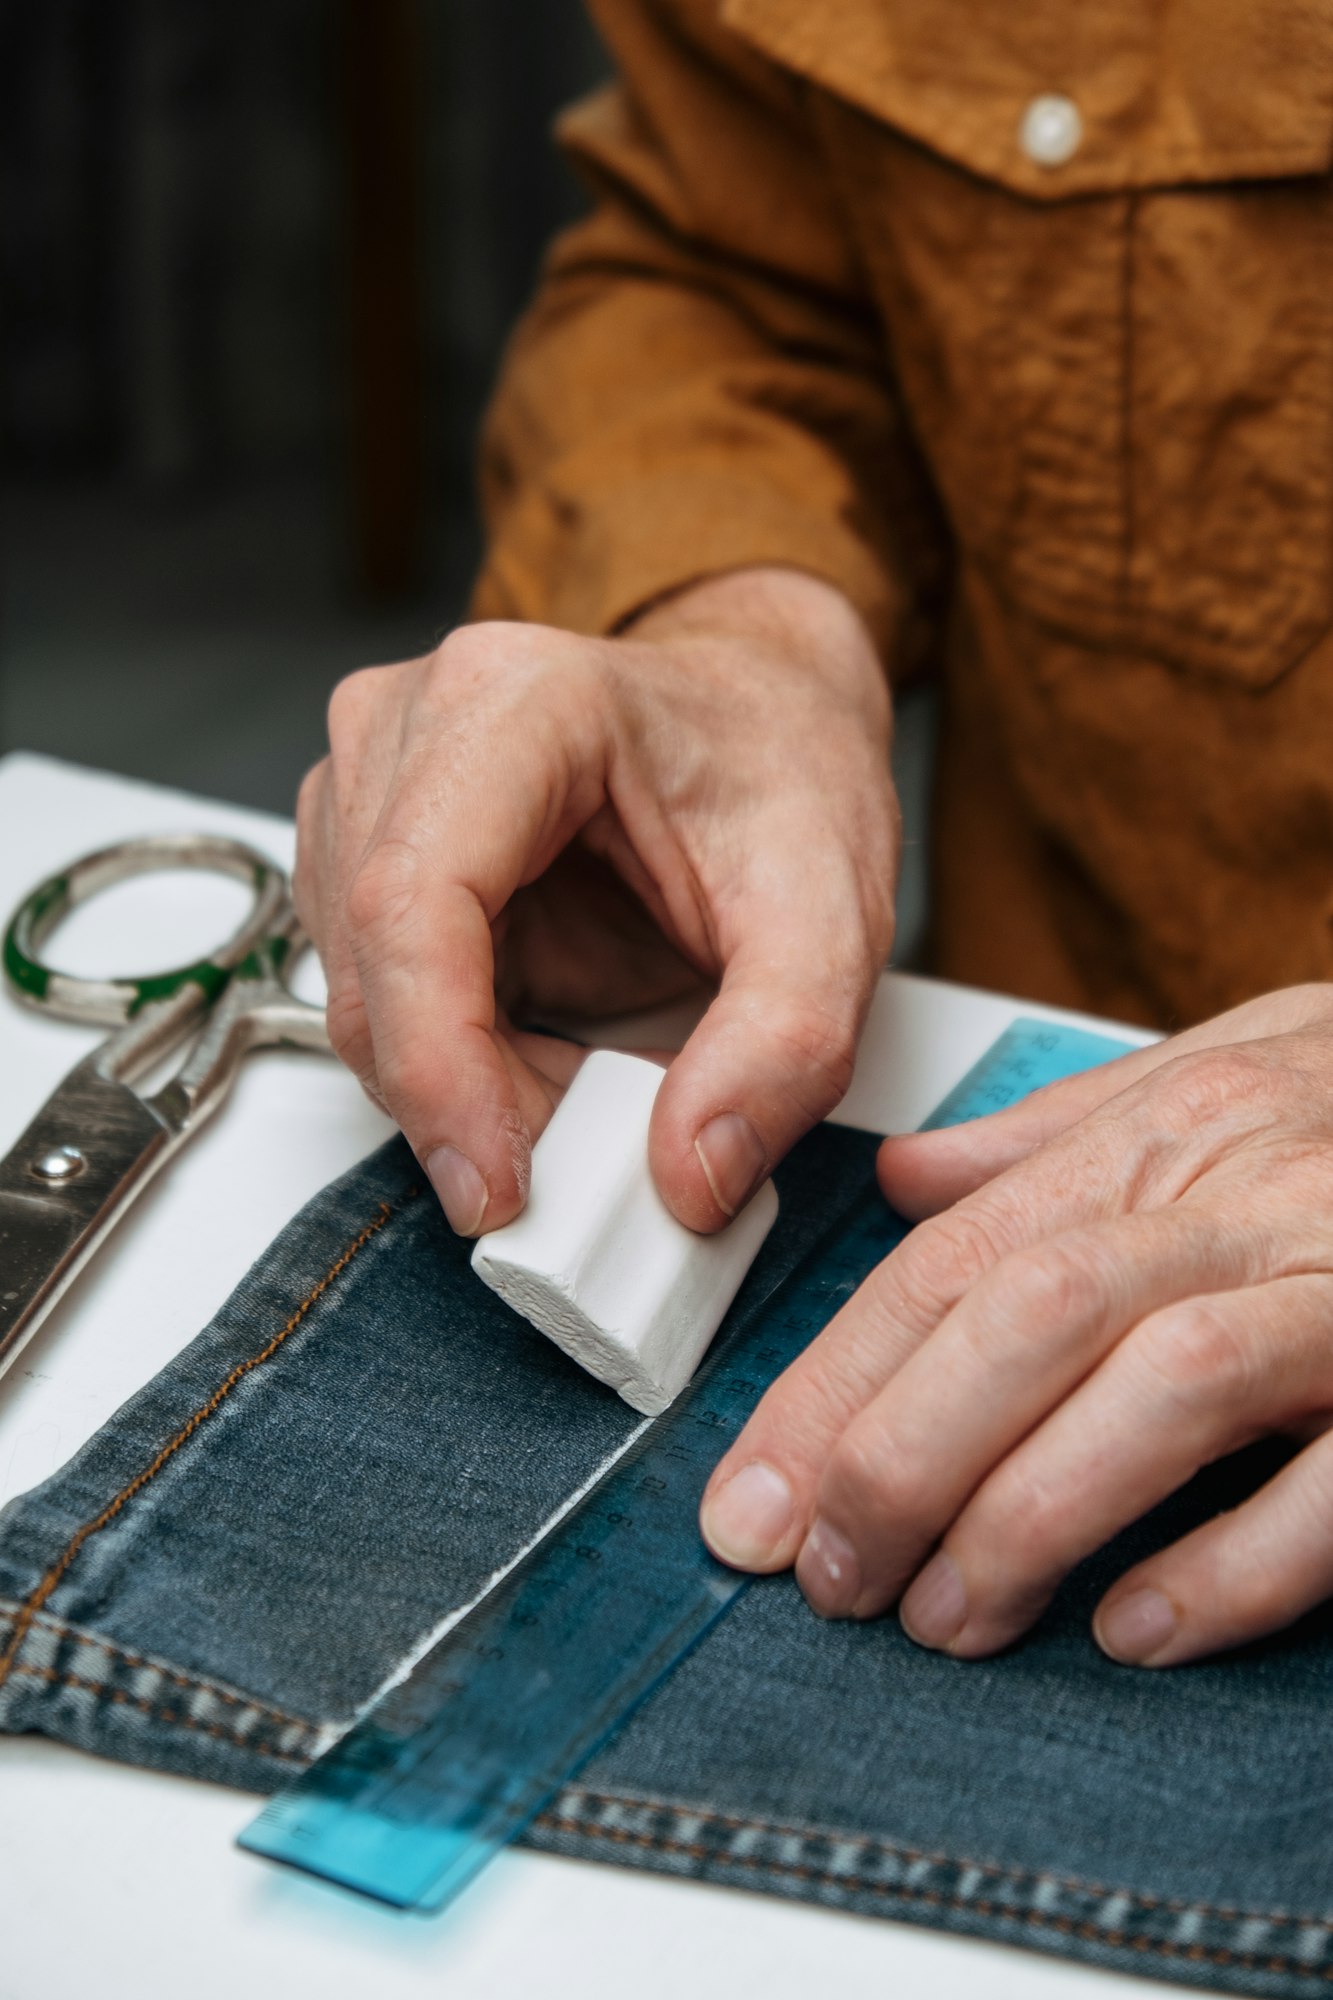 tailor in a sewing studio works with jeans. alteration, hemming, shortening or upgrade.